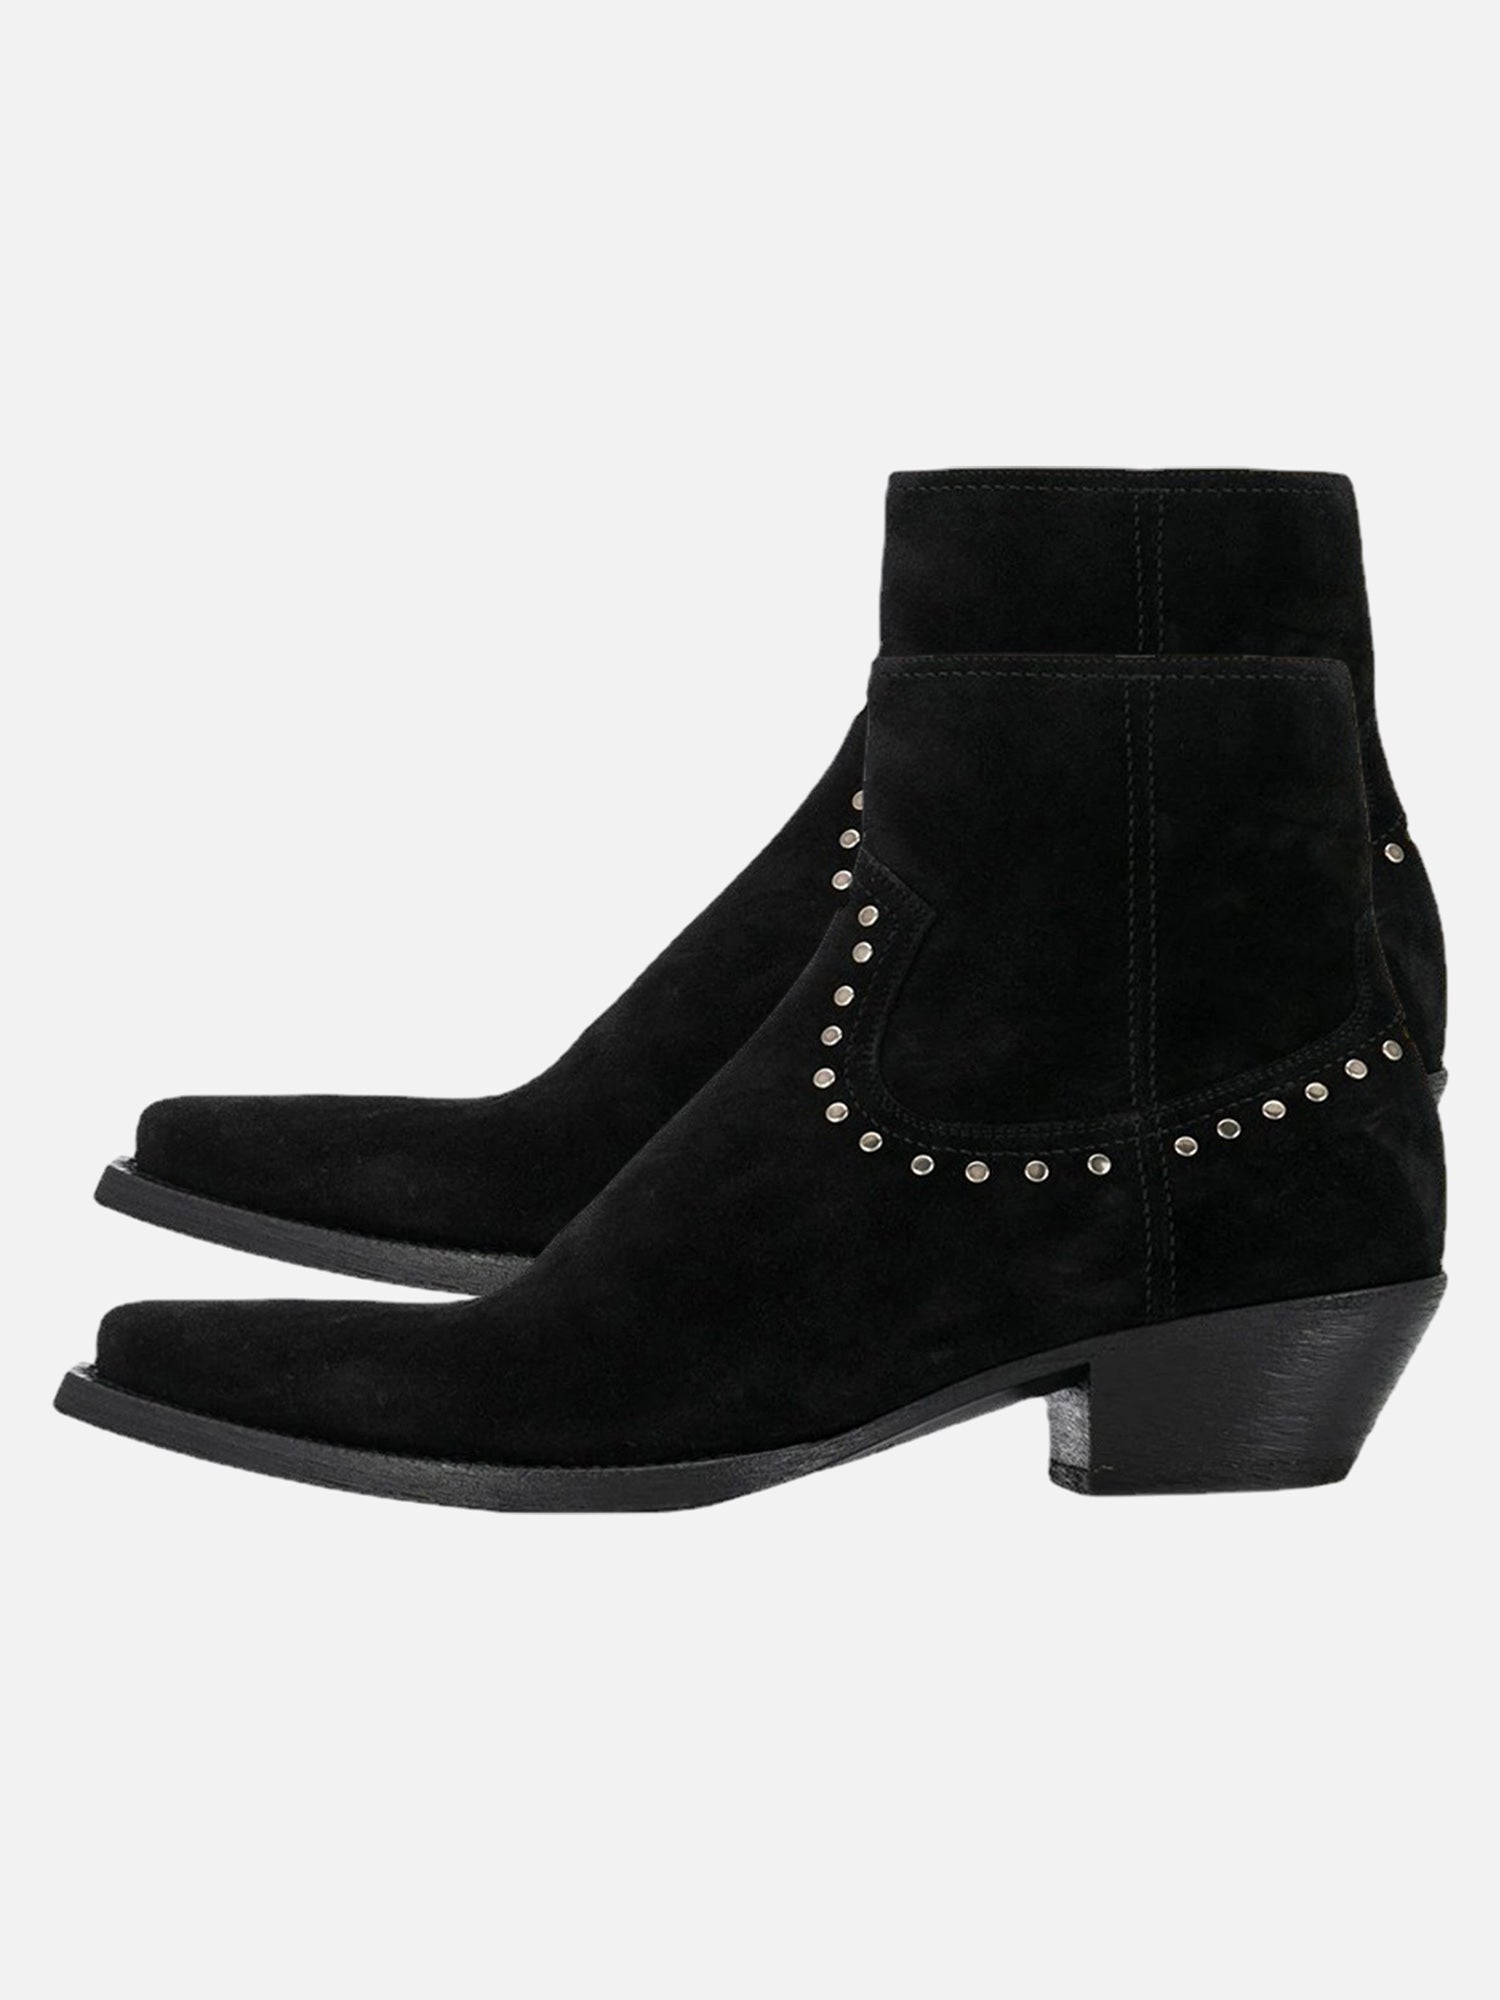 Stylish Pointed Toe Side Zipper Rivet Frosted Chelsea Boots